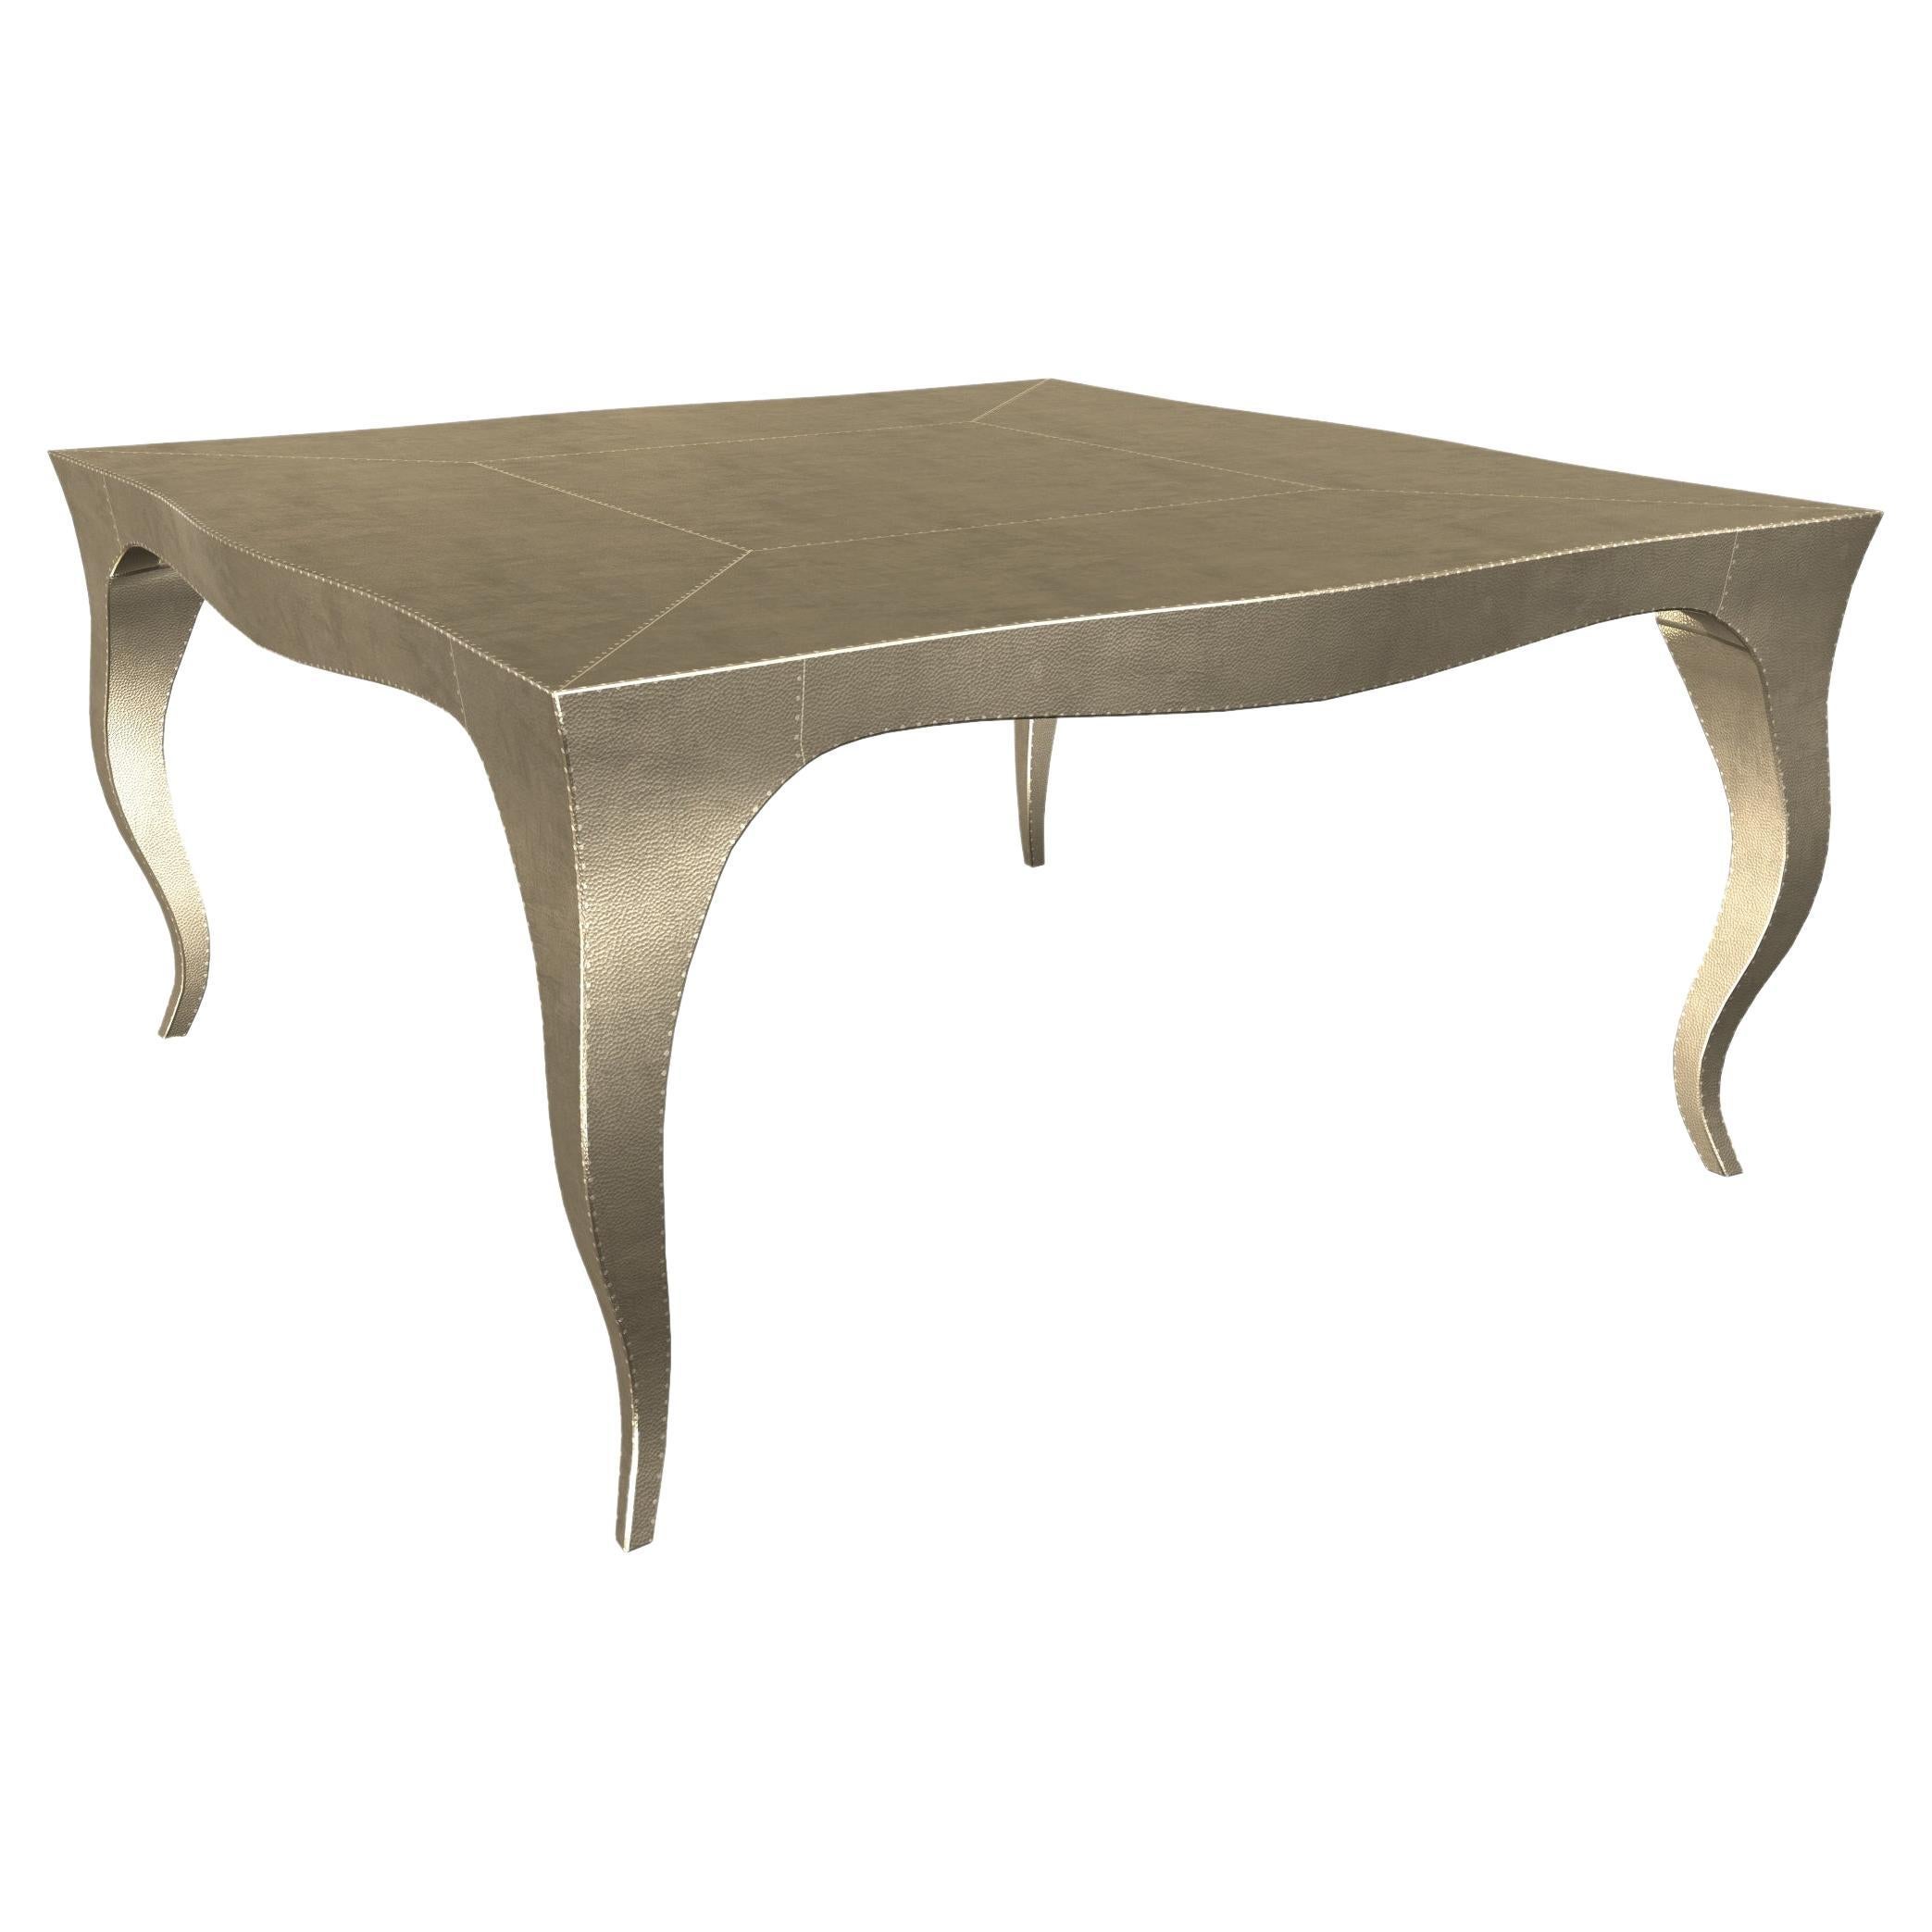 Louise Art Deco Industrial and Work Tables Mid. Hammered Brass 18.5x18.5x10 inch For Sale